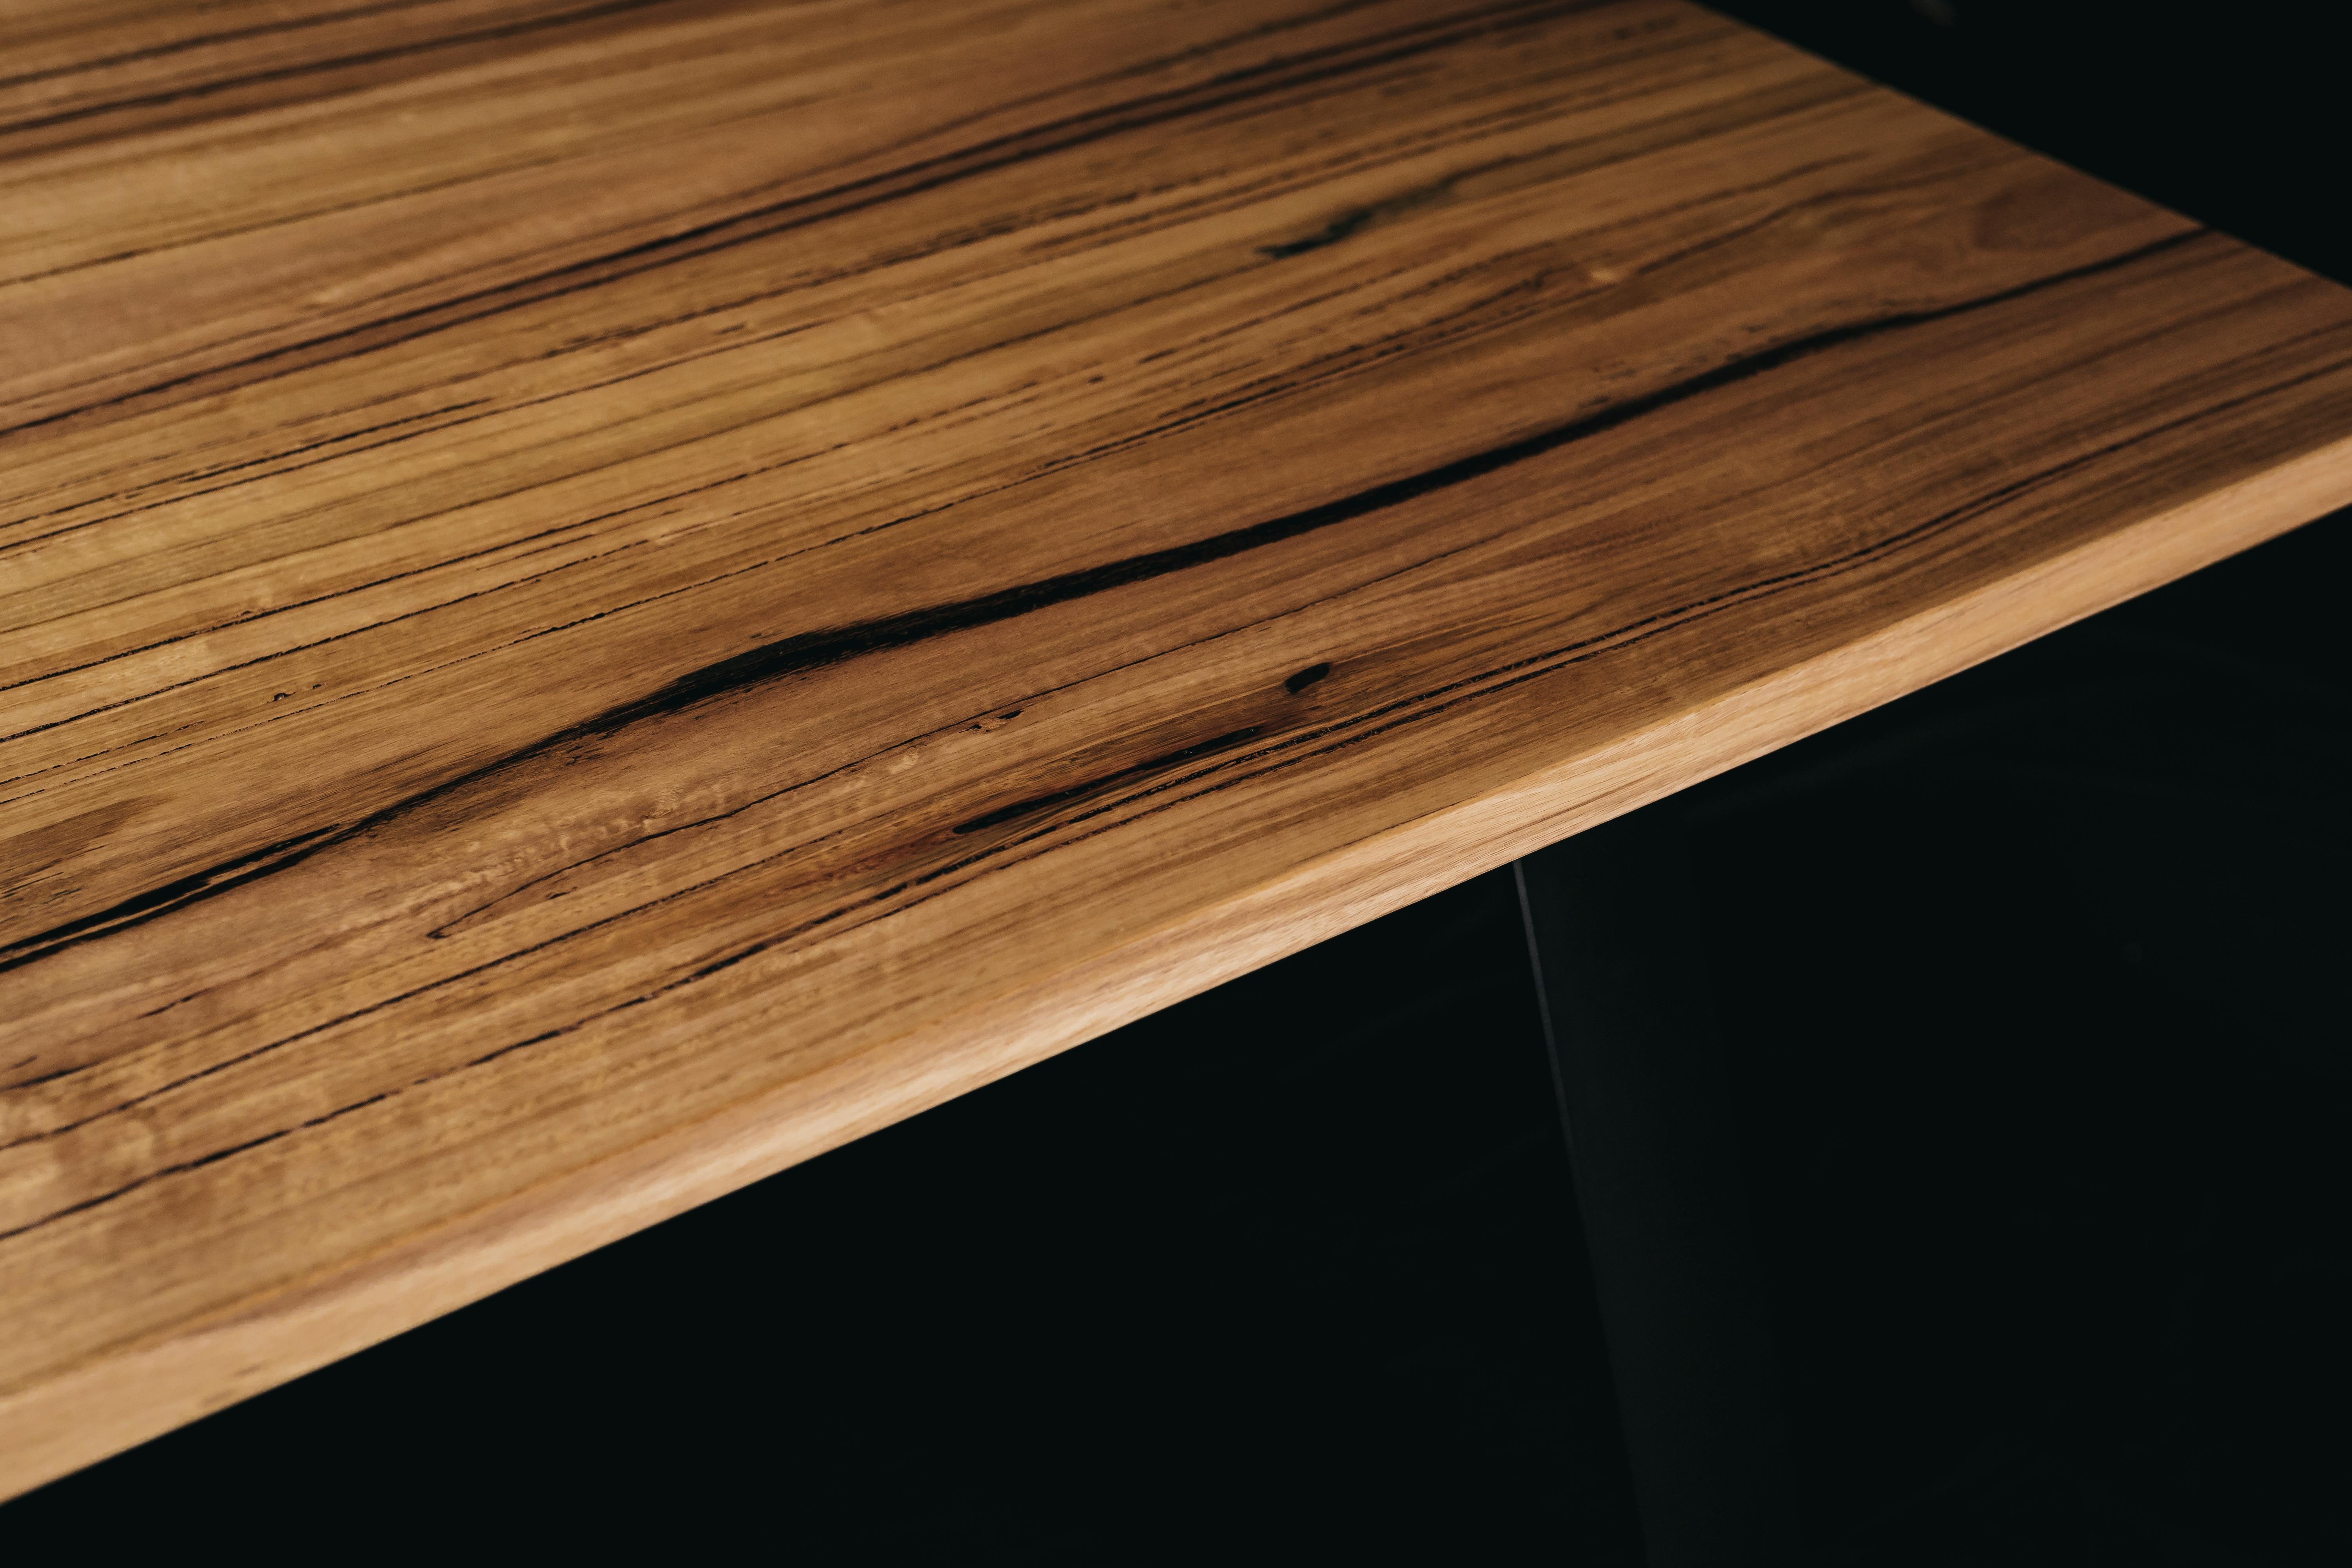 Representing an artistic shift in material pairing, the Aurora encapsulates the raw industrial feel of solid steel as well as the natural beauty of solid hardwood with emphasis put on the solid colour to enhance the uniqueness of the grain.